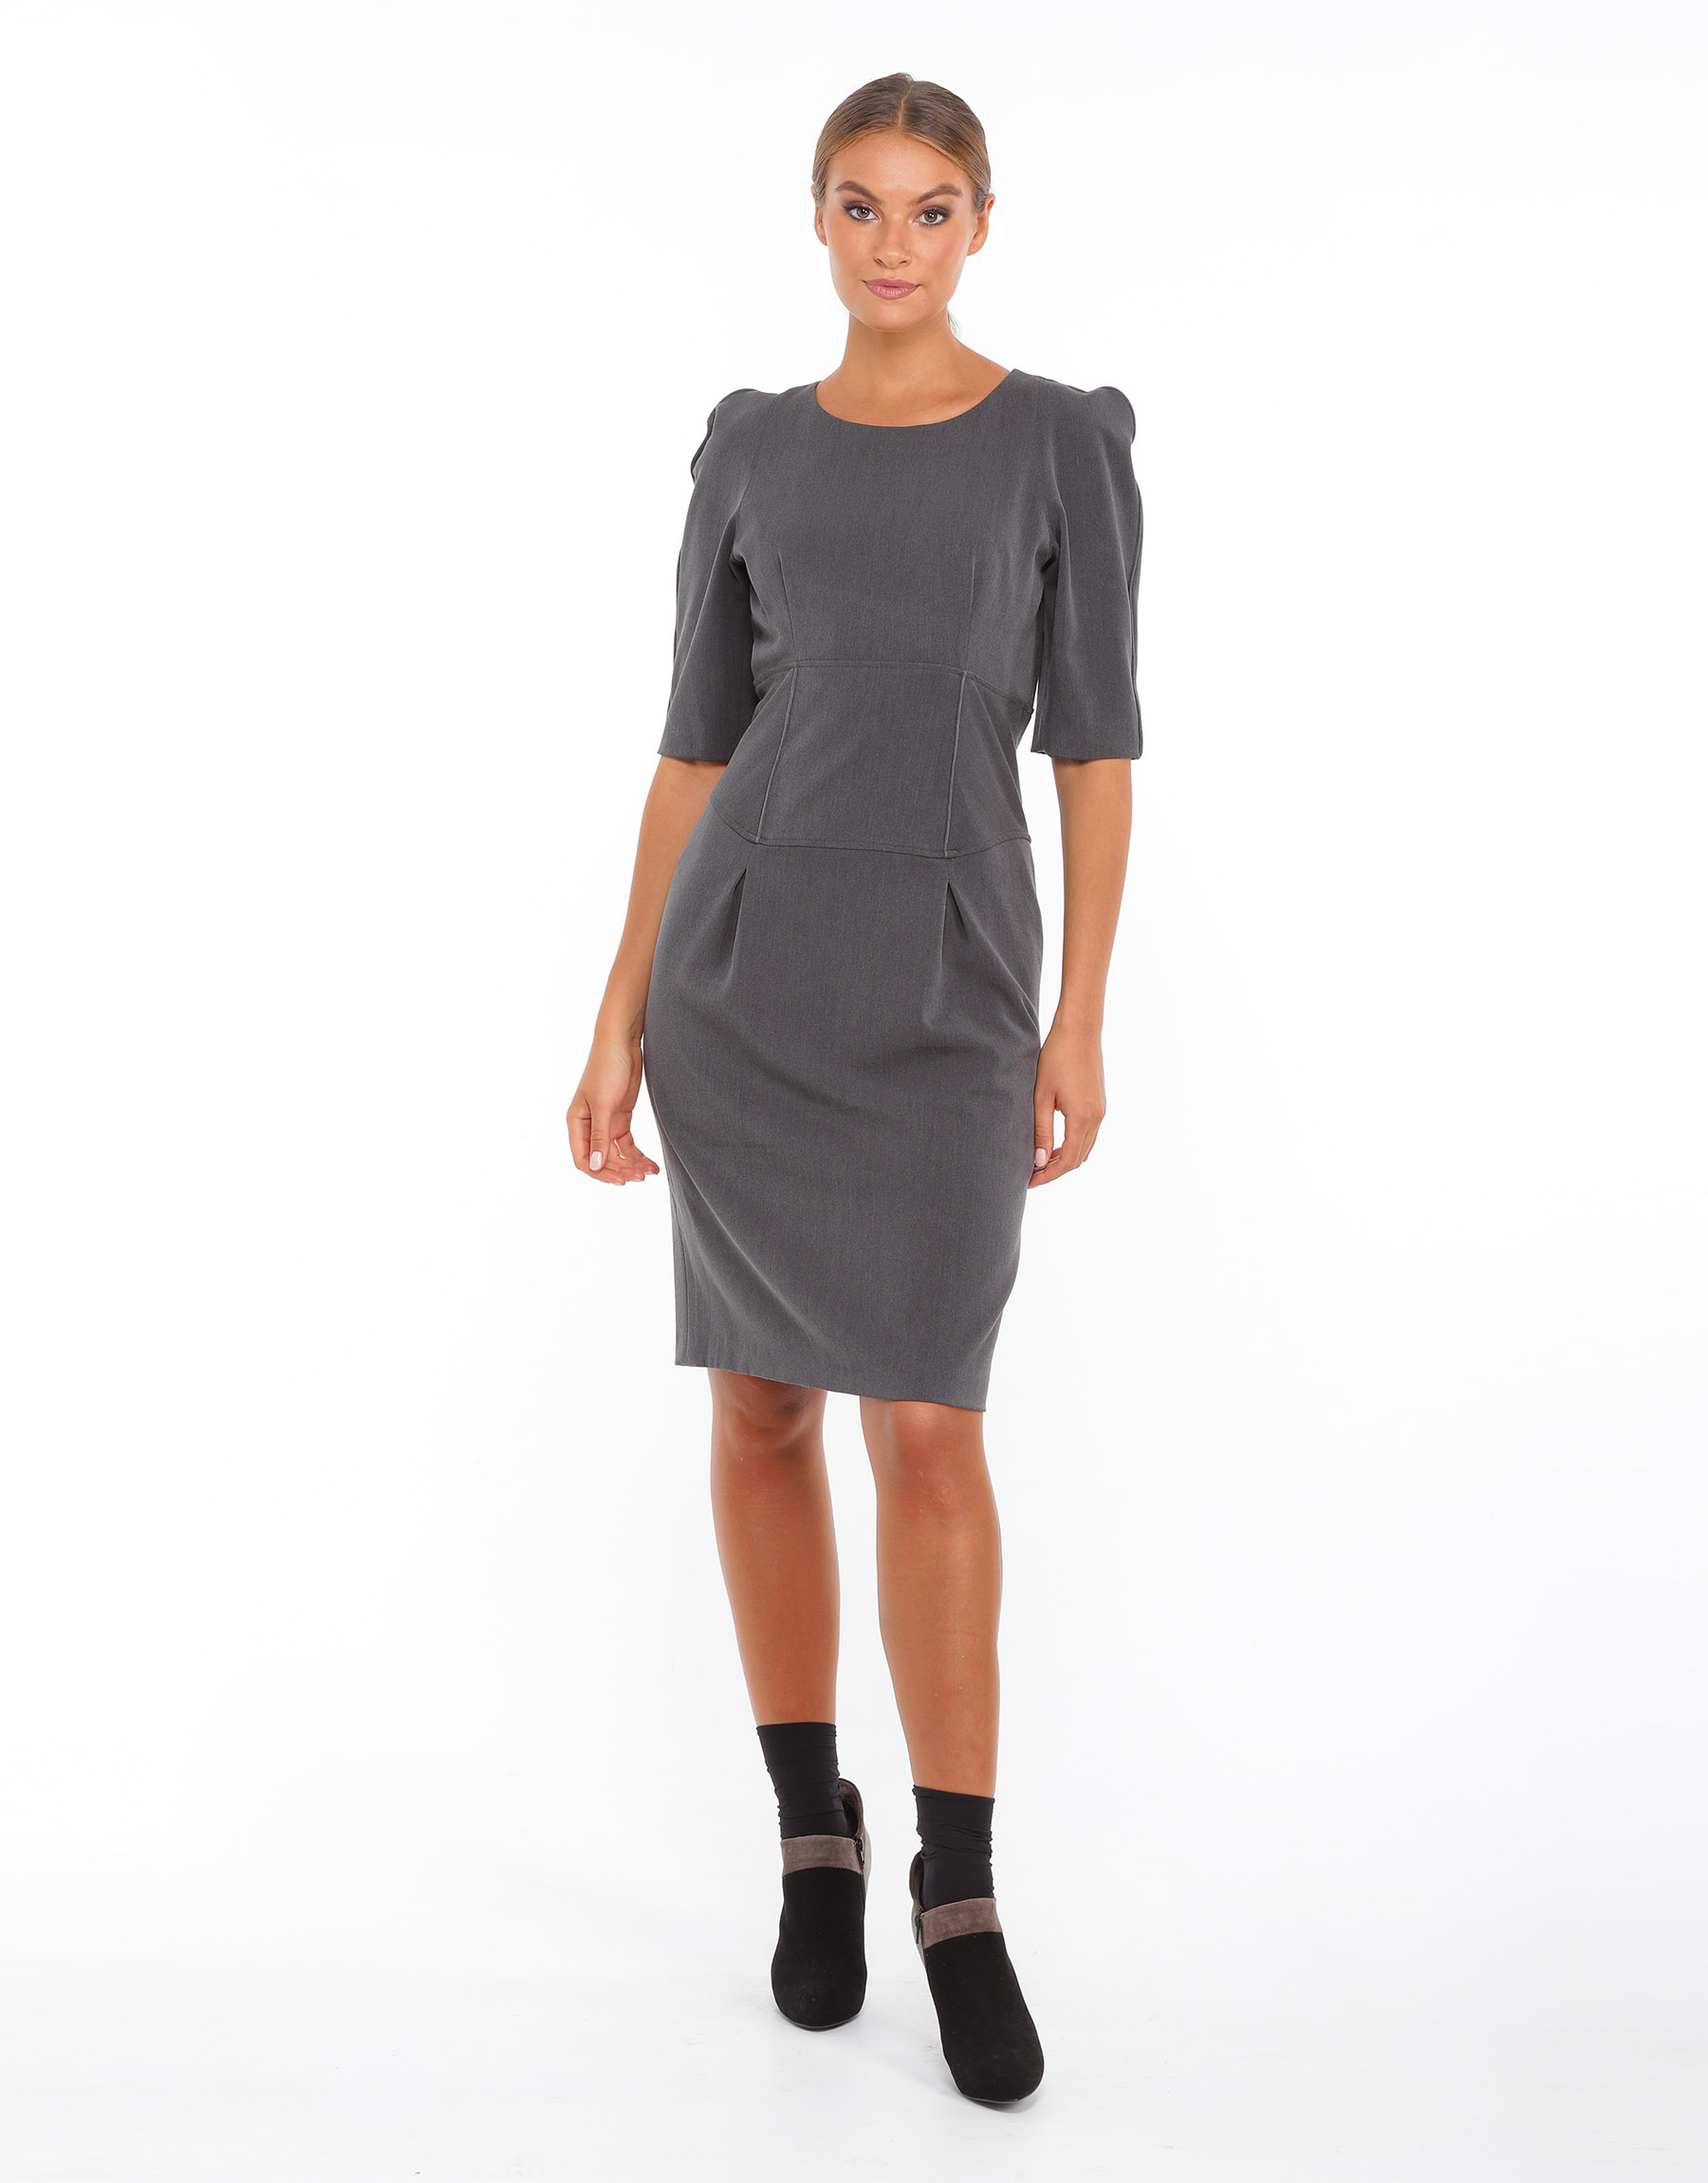 Straight dress curved in steel gray crepe